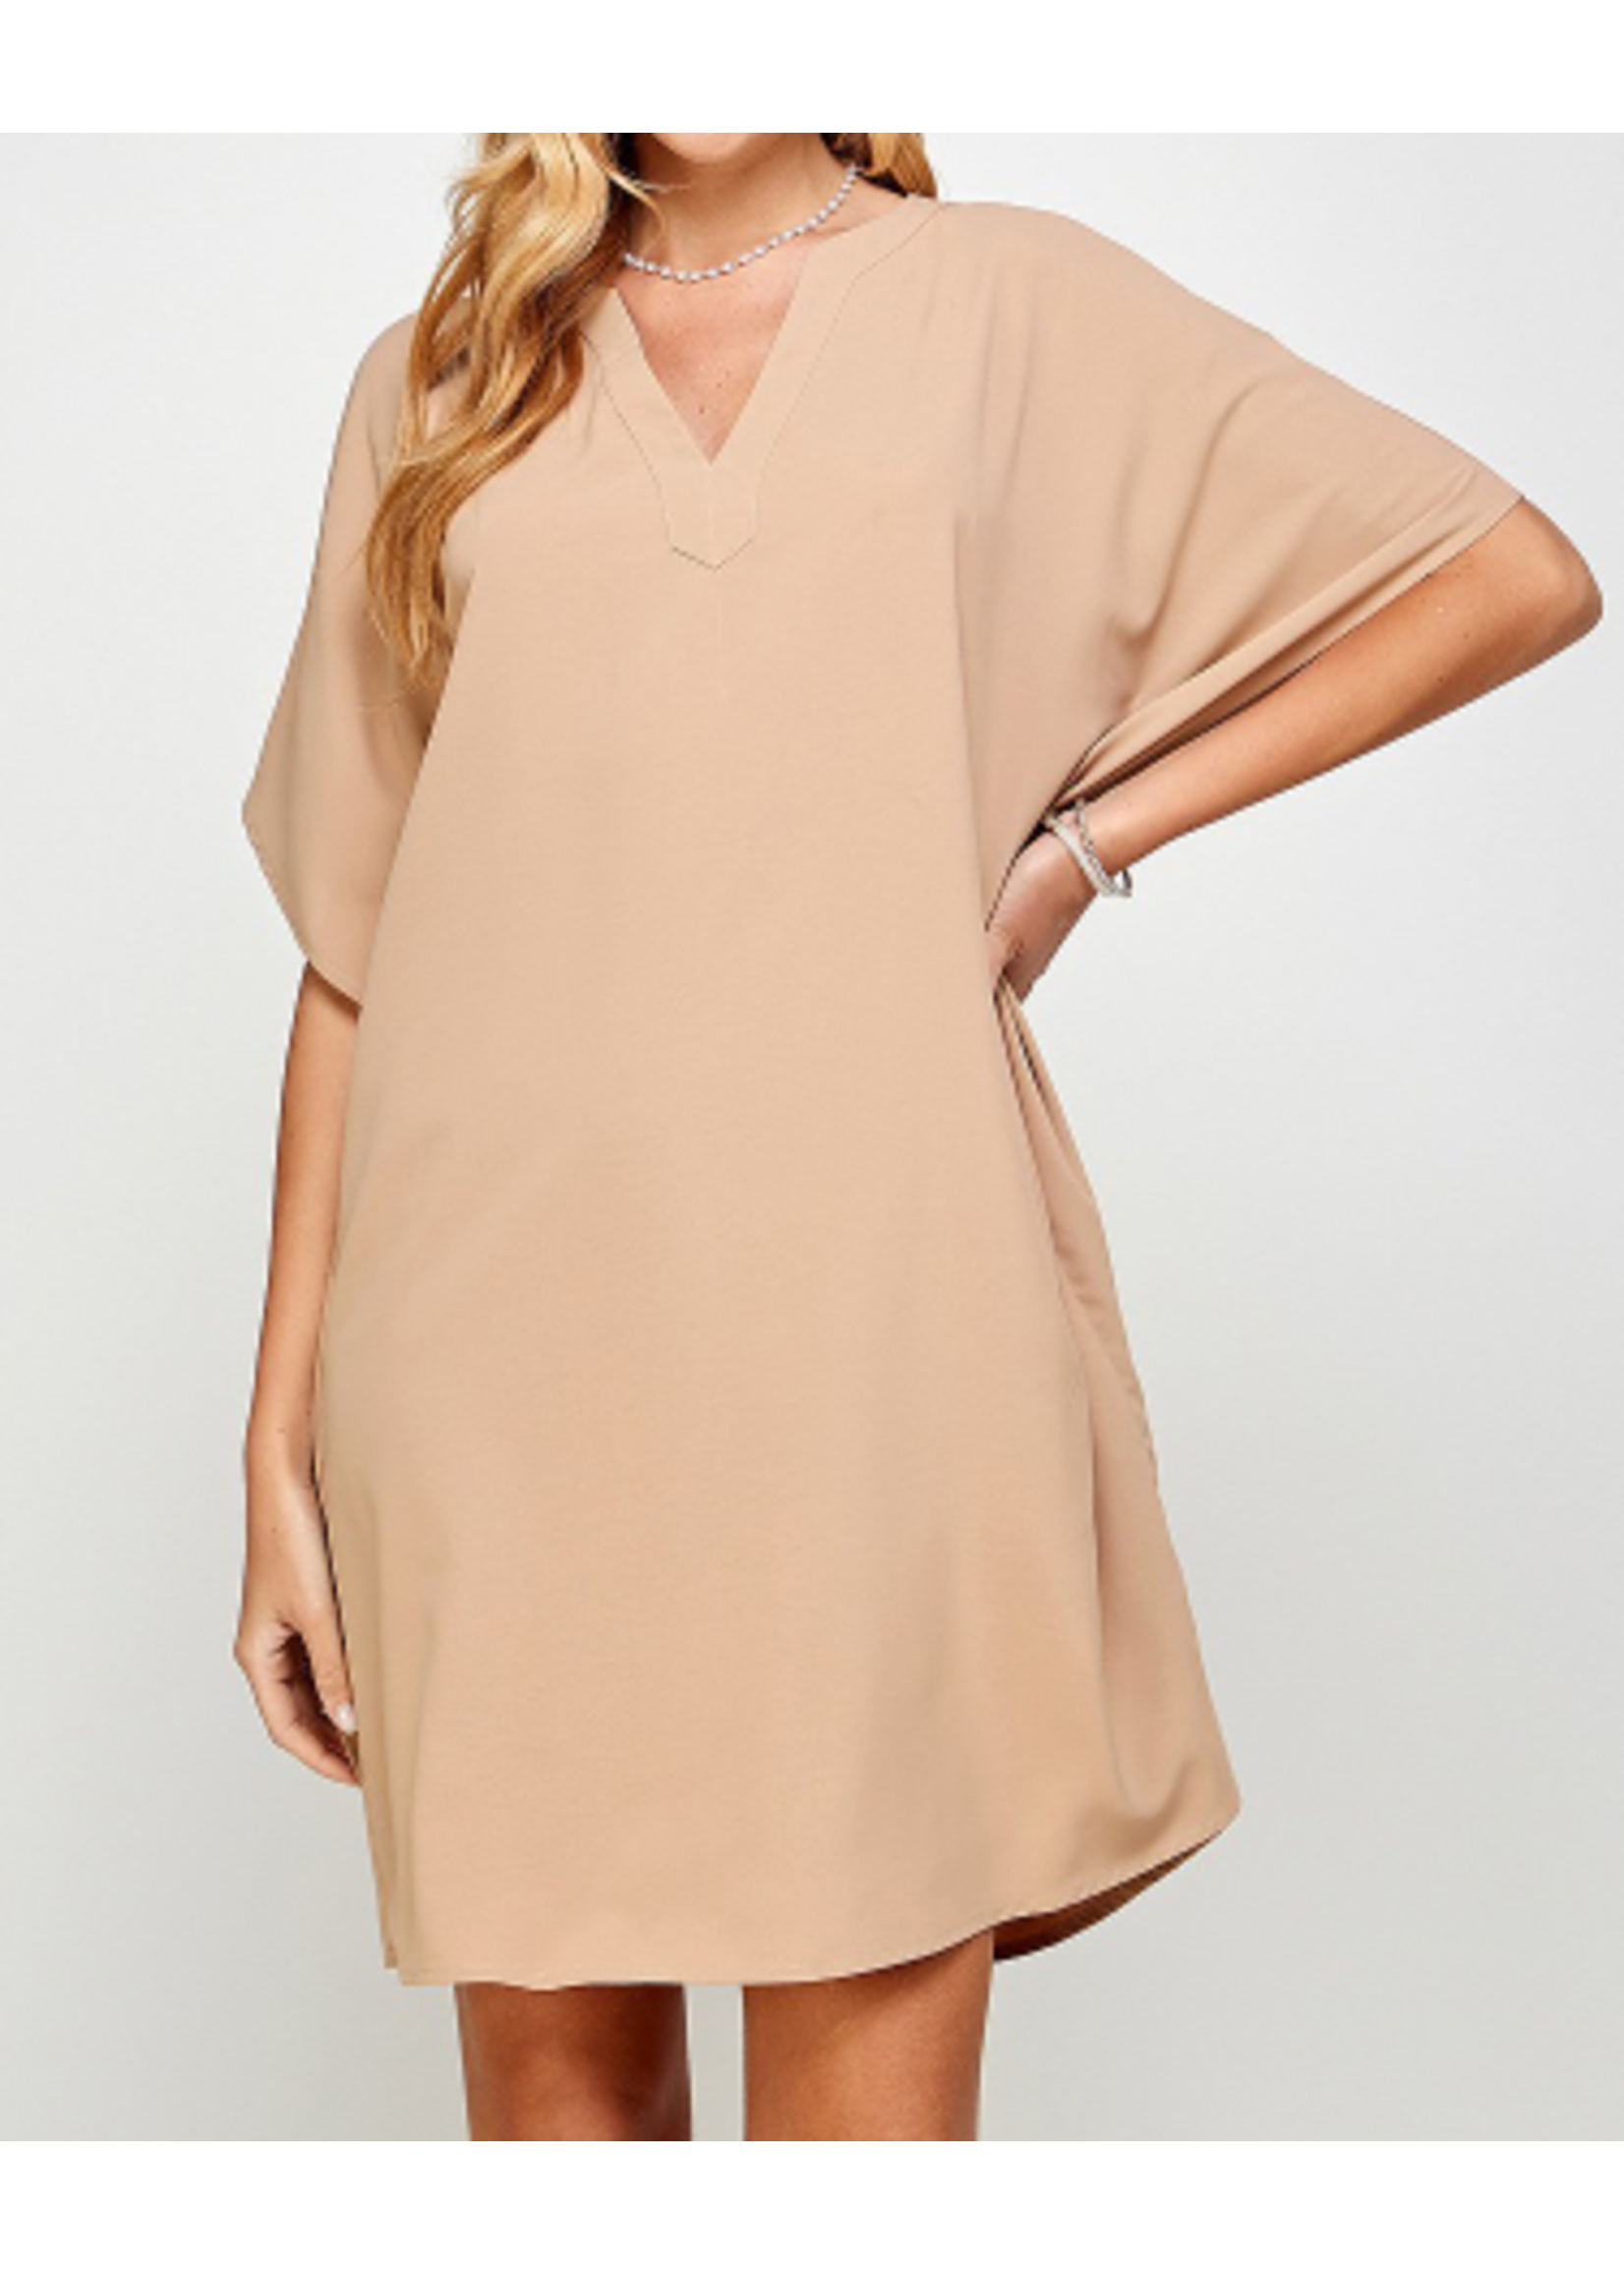 SNS24908 - SOLID CASUAL BAT WINGED SHIFT DRESS